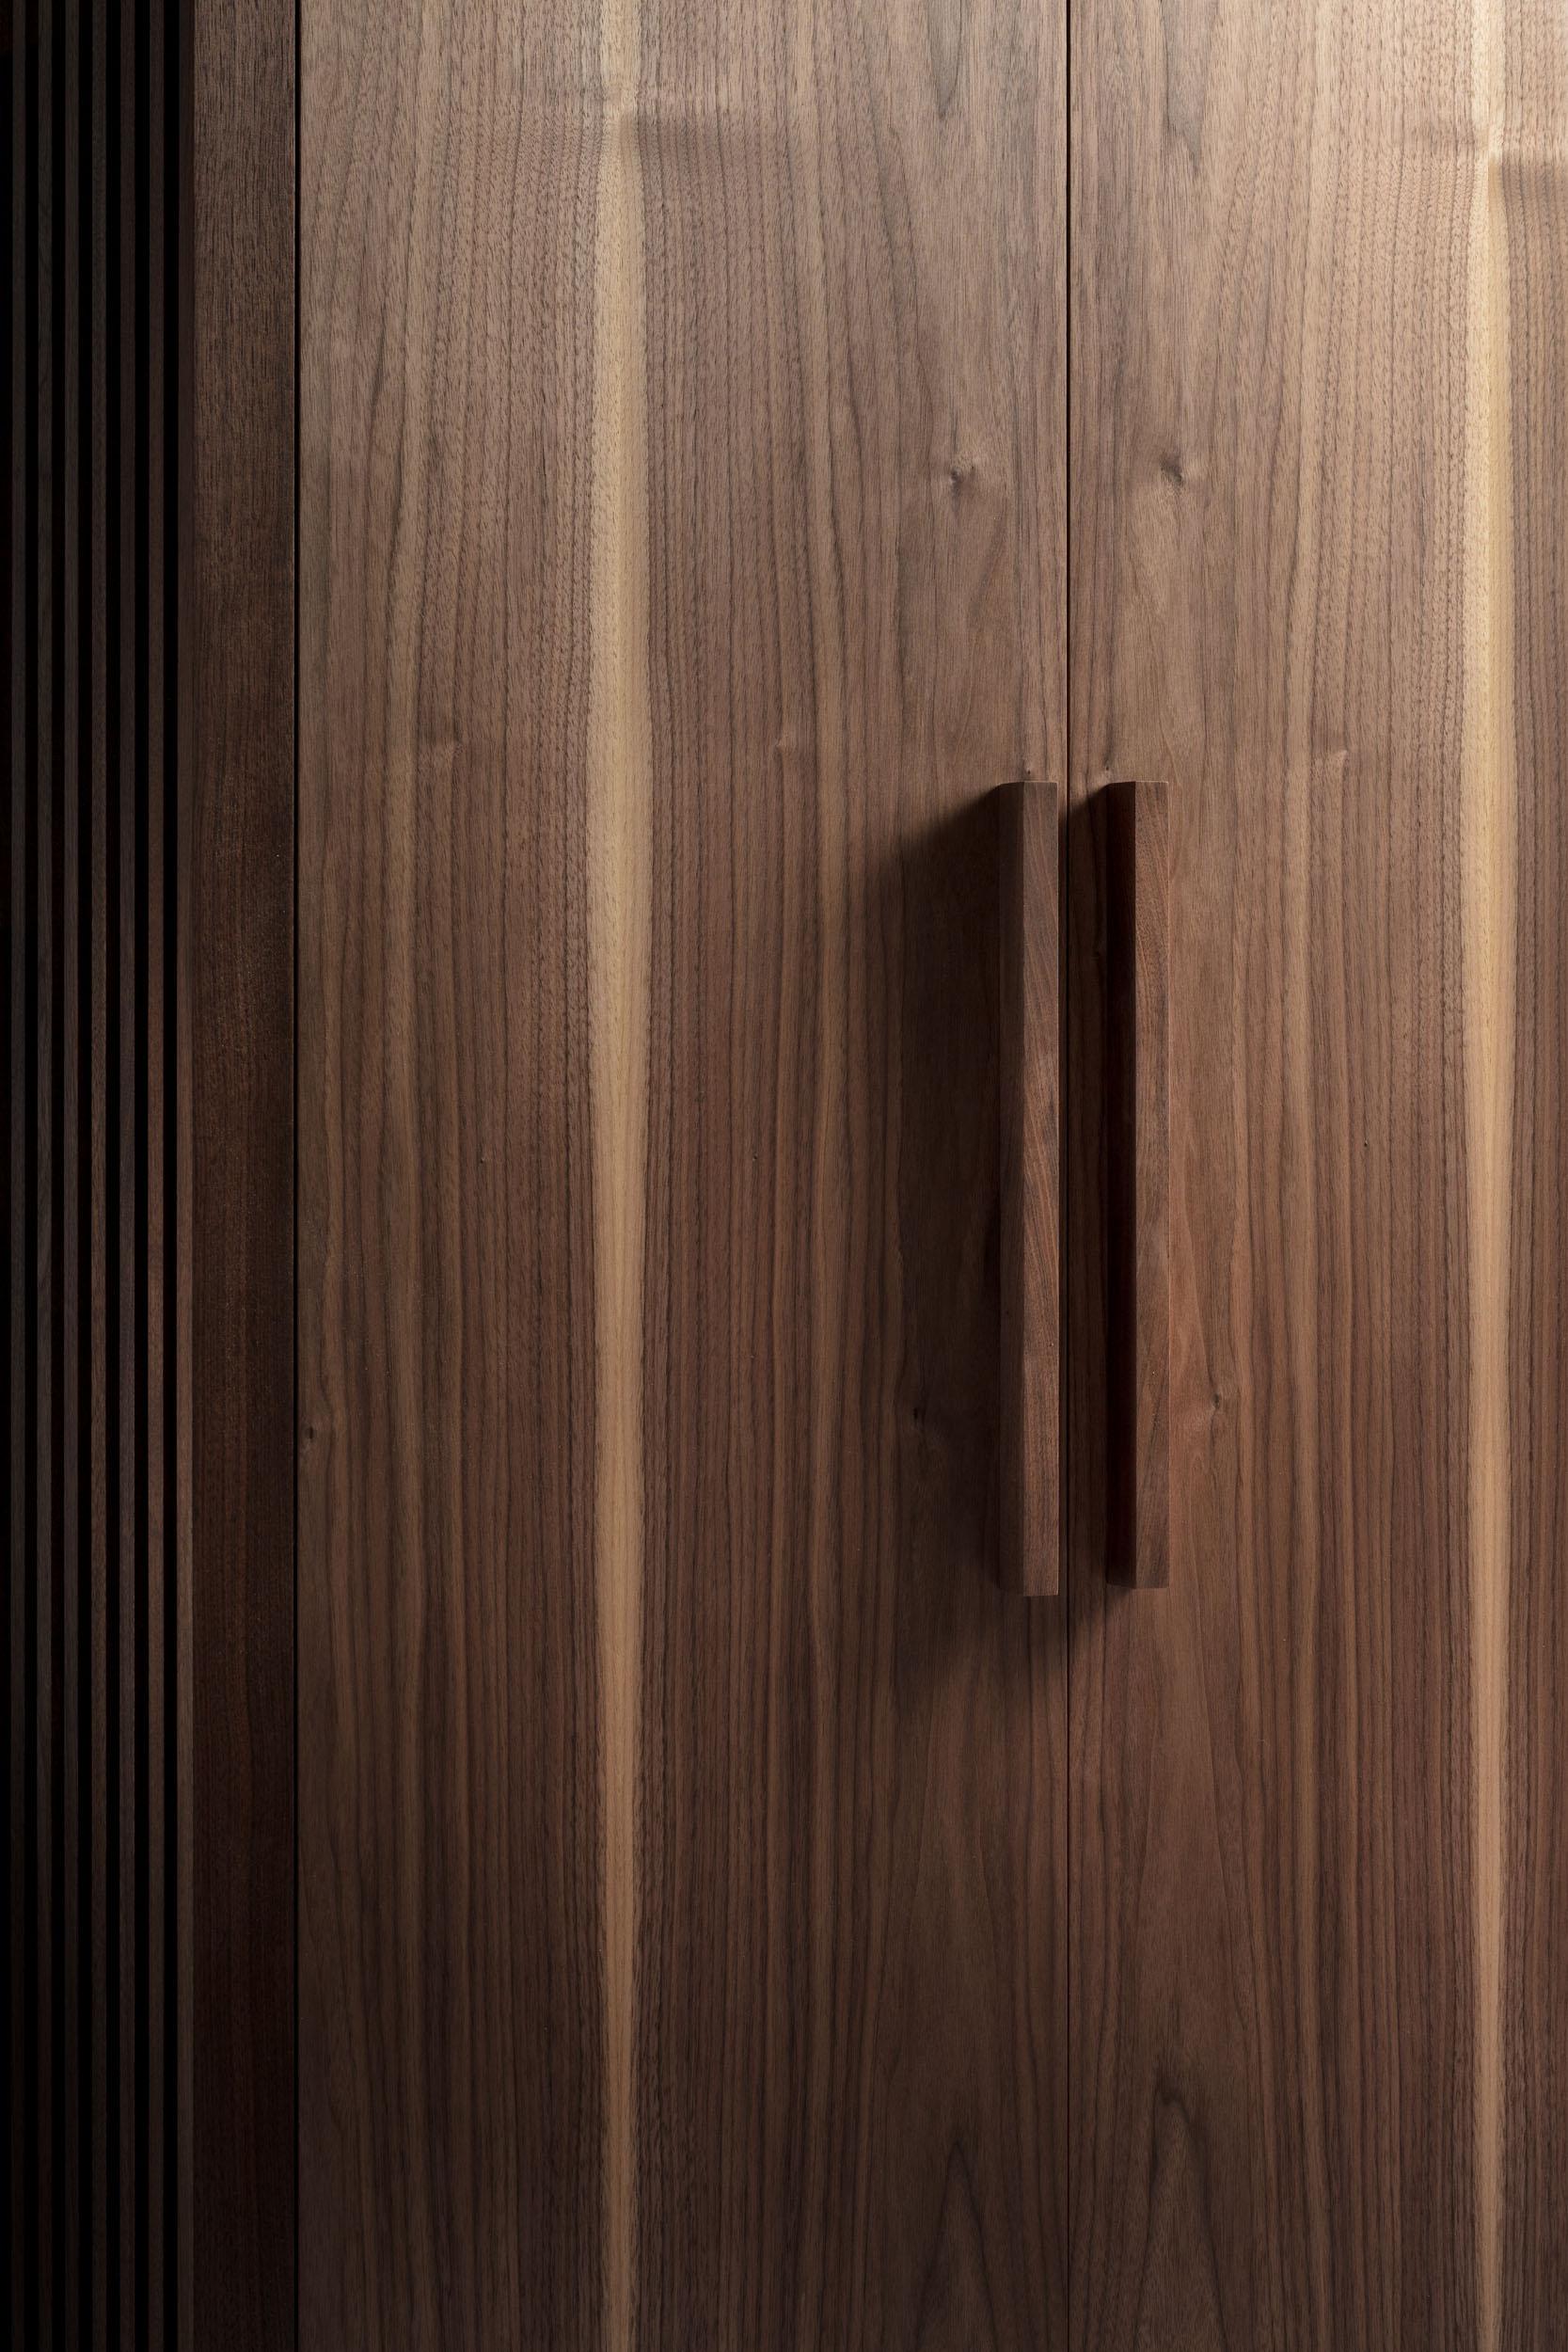 Hand-Crafted Contemporary, Solid American Walnut Handmade Ante Closet by Tim Vranken For Sale